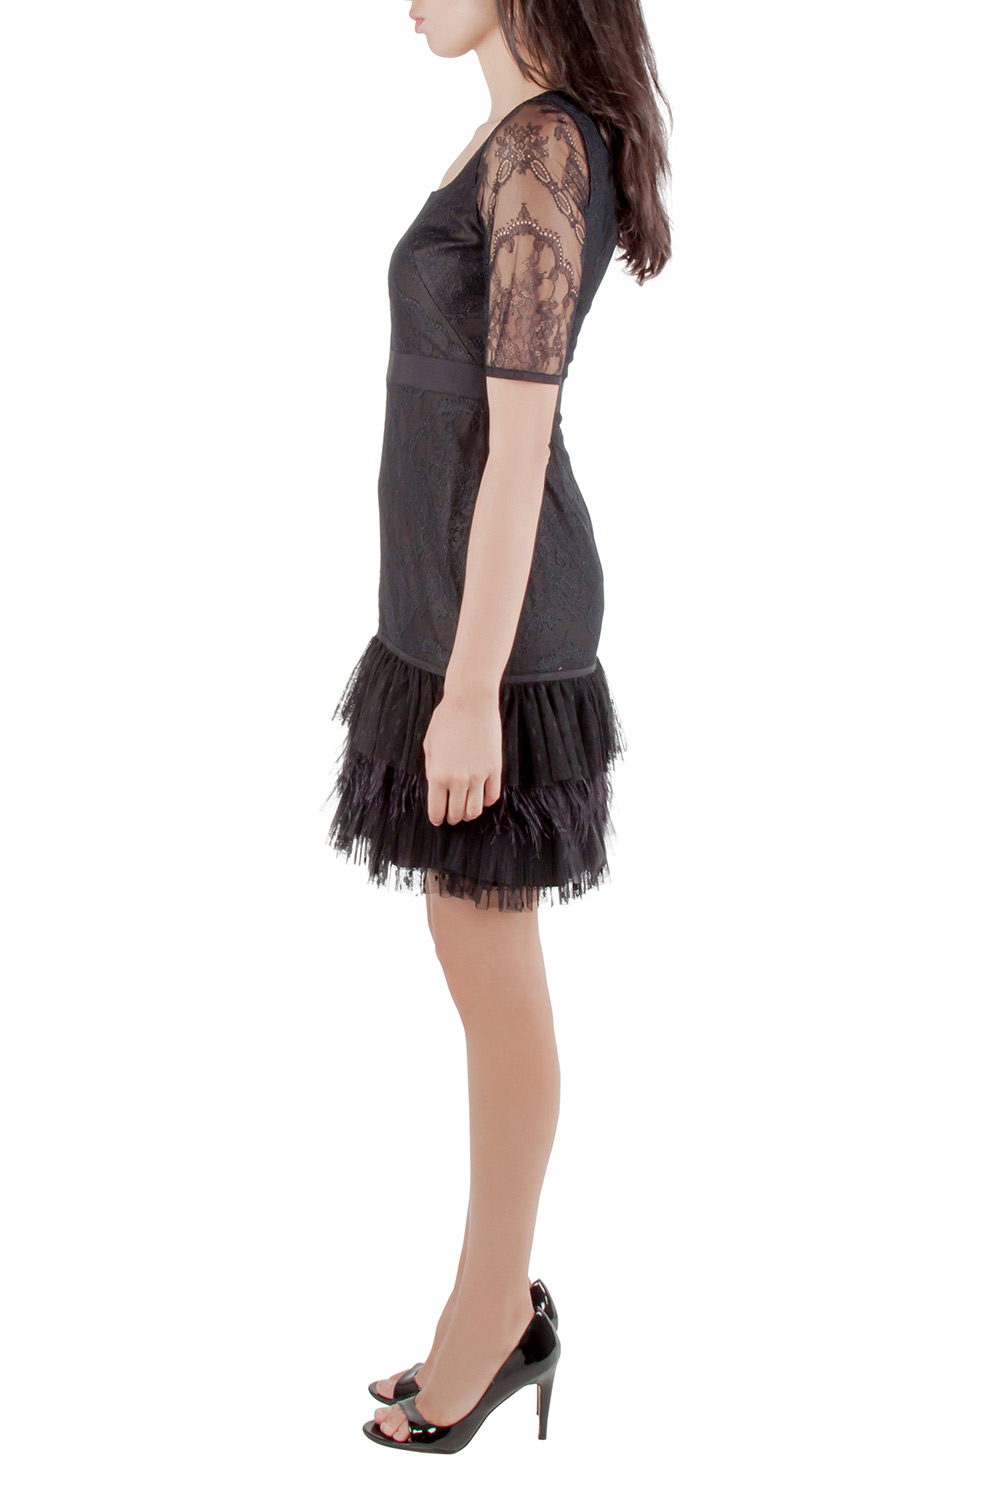 

Marchesa Notte Black Lace Ruffle Tiered Hem Feather Insert Cocktail Dress